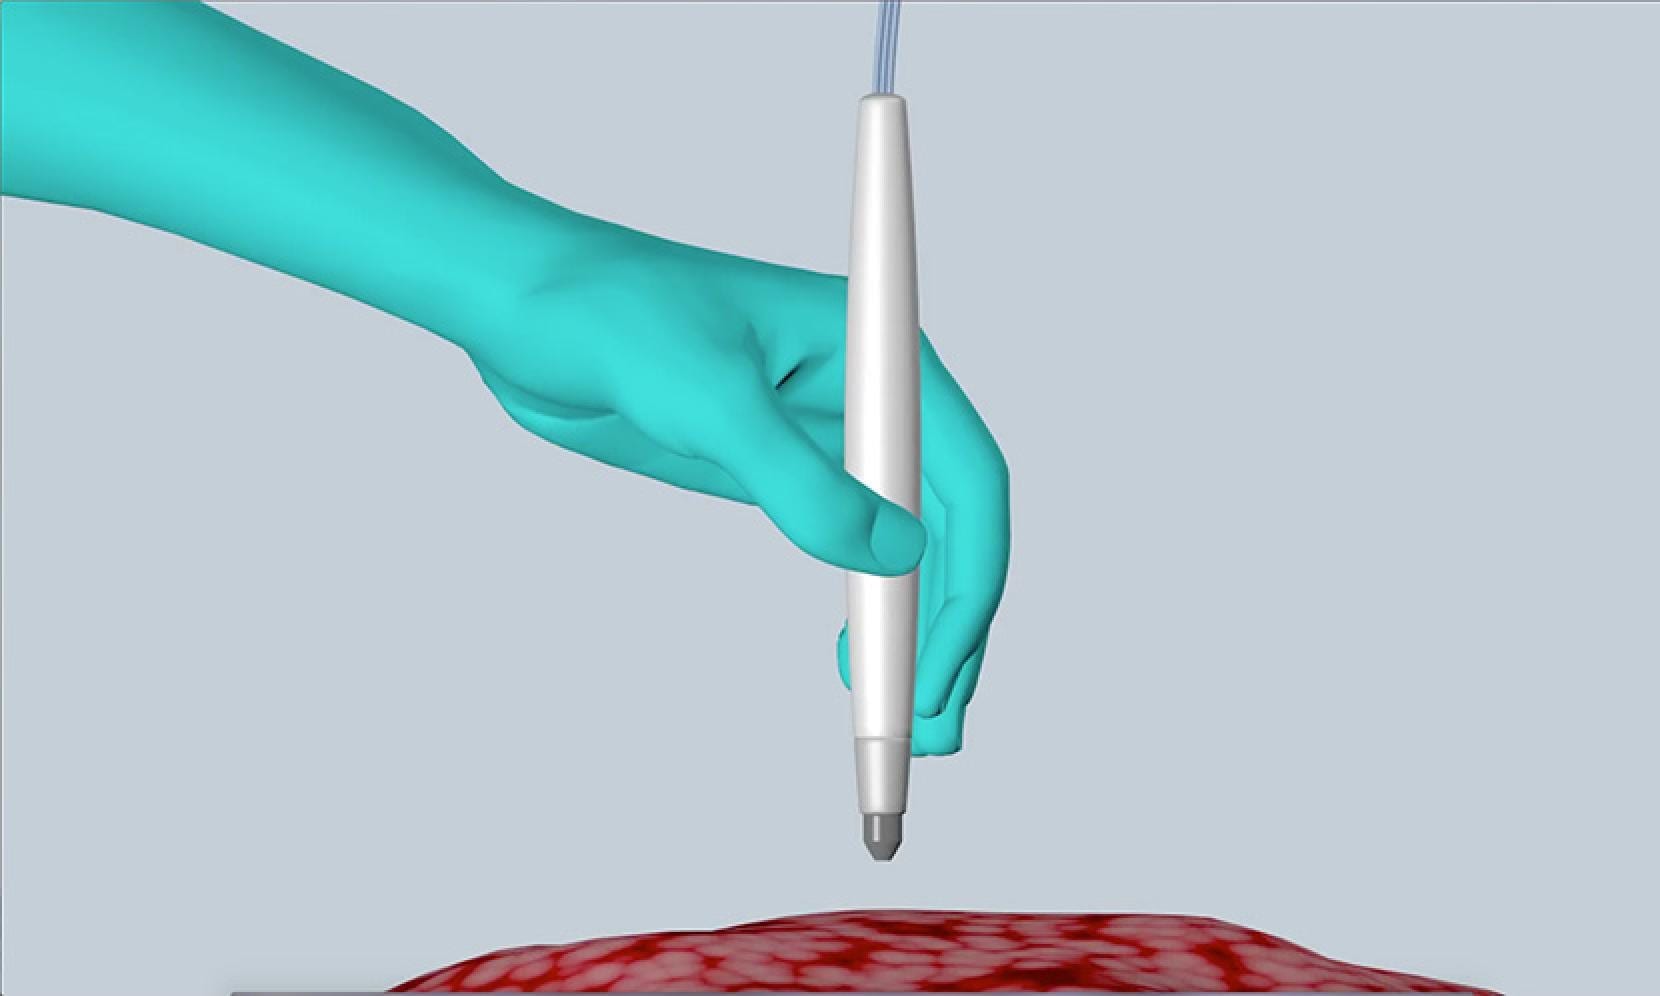 A powerful tool that rapidly and accurately identifies cancerous tissue during surgery in about 10 seconds